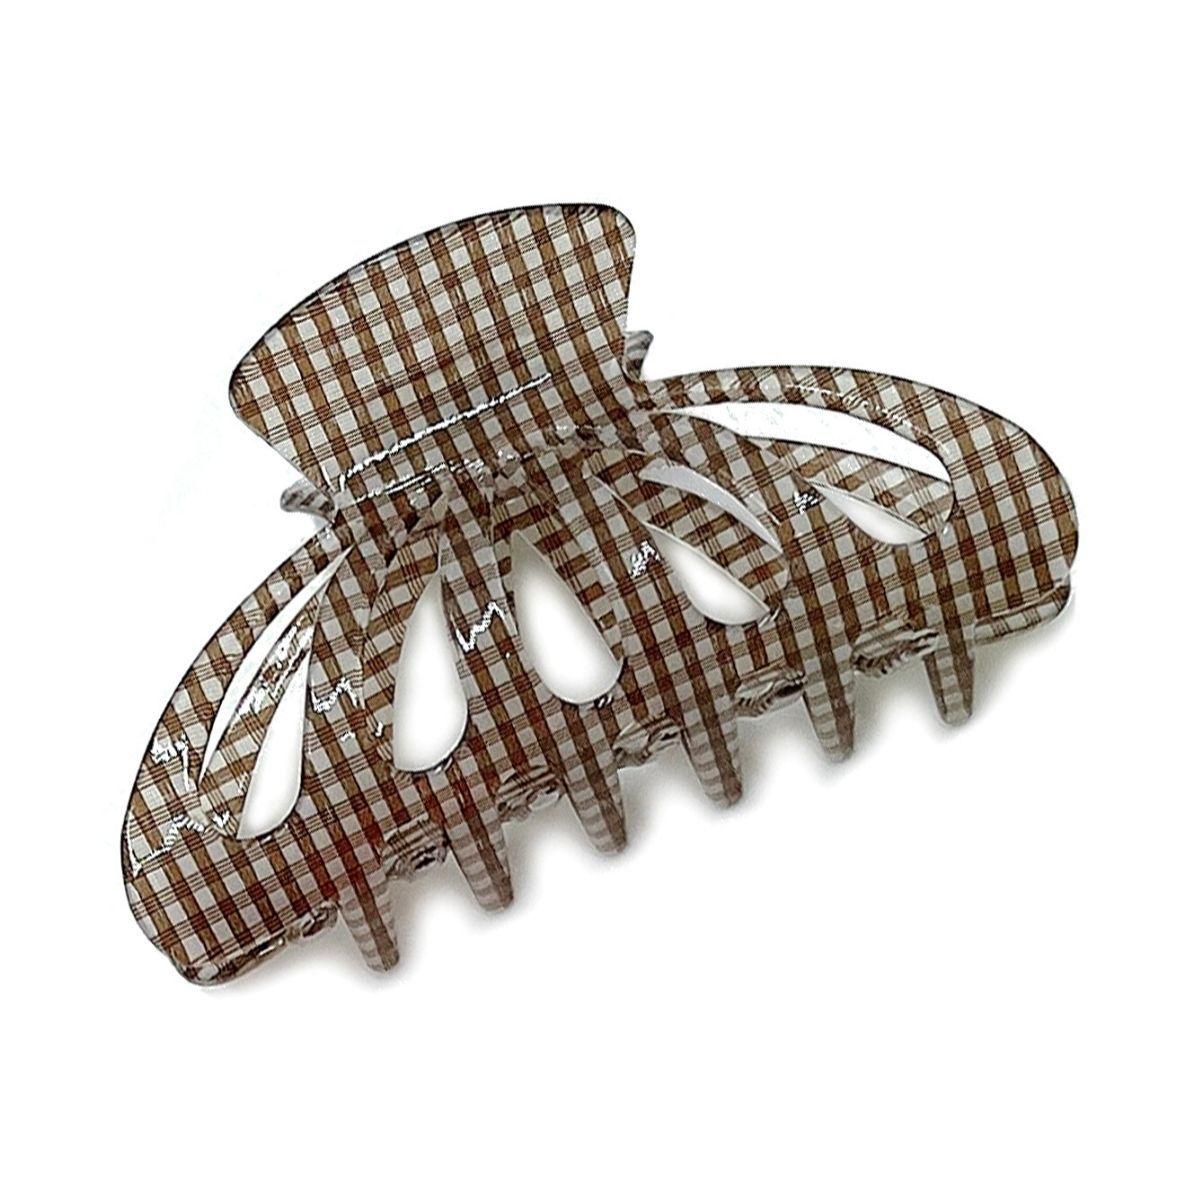 Get Effortless Style: Brown Gingham Hair Claw Clip - Buy Now